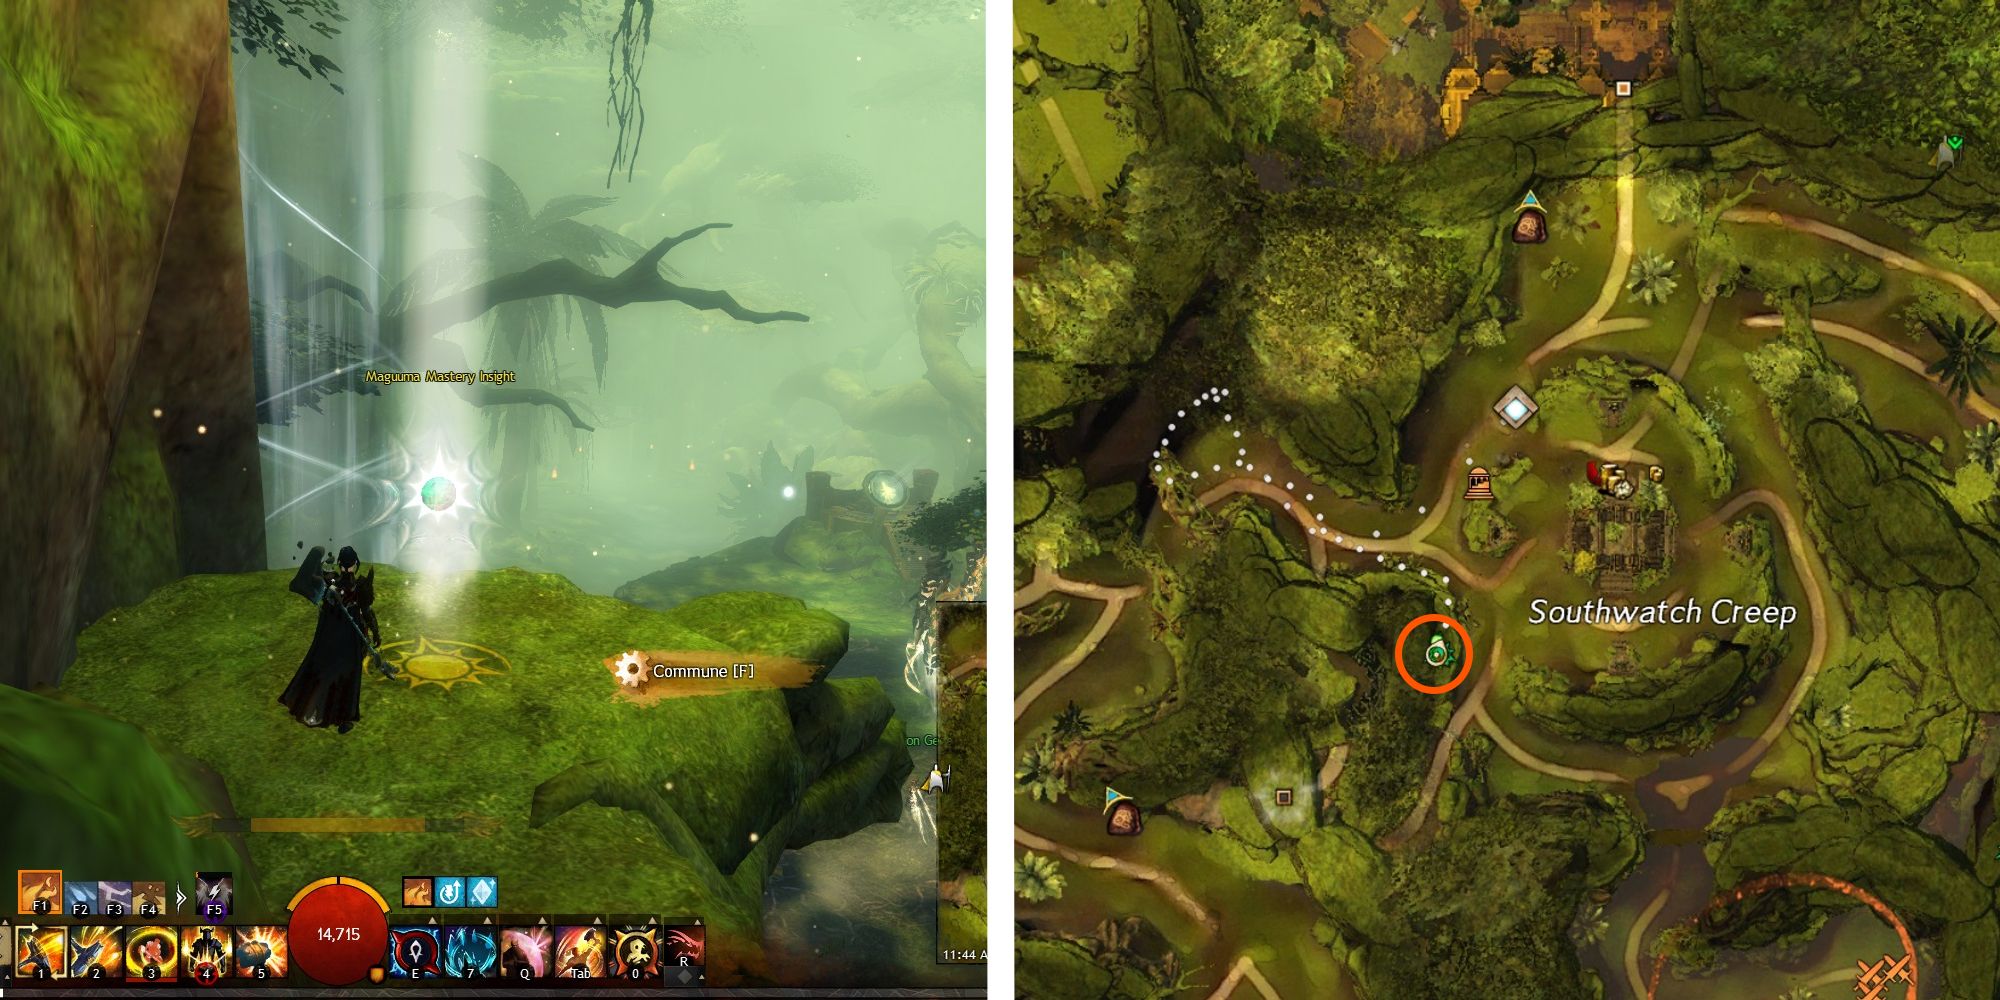 image of player at the Southwatch Creep Insight next to image of location on map